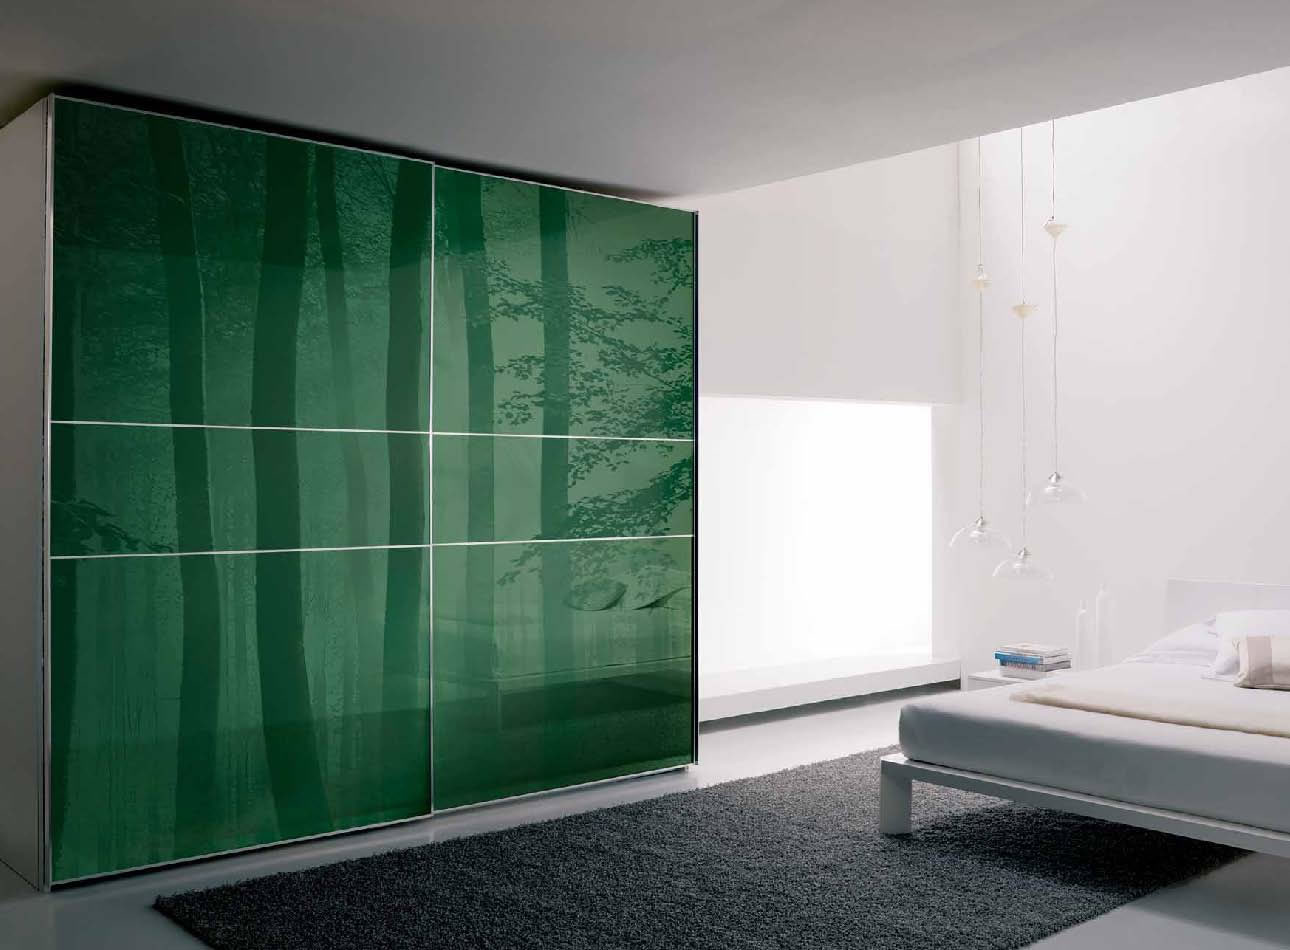 cool-natural-green-pattern-sliding-glass-door-wardrobe-together-with-two-panel-and-white-iron-frame-also-grey-area-rug-plus-white-tile-flooring-along-with-white-bed-with-white-mattress-and-cre